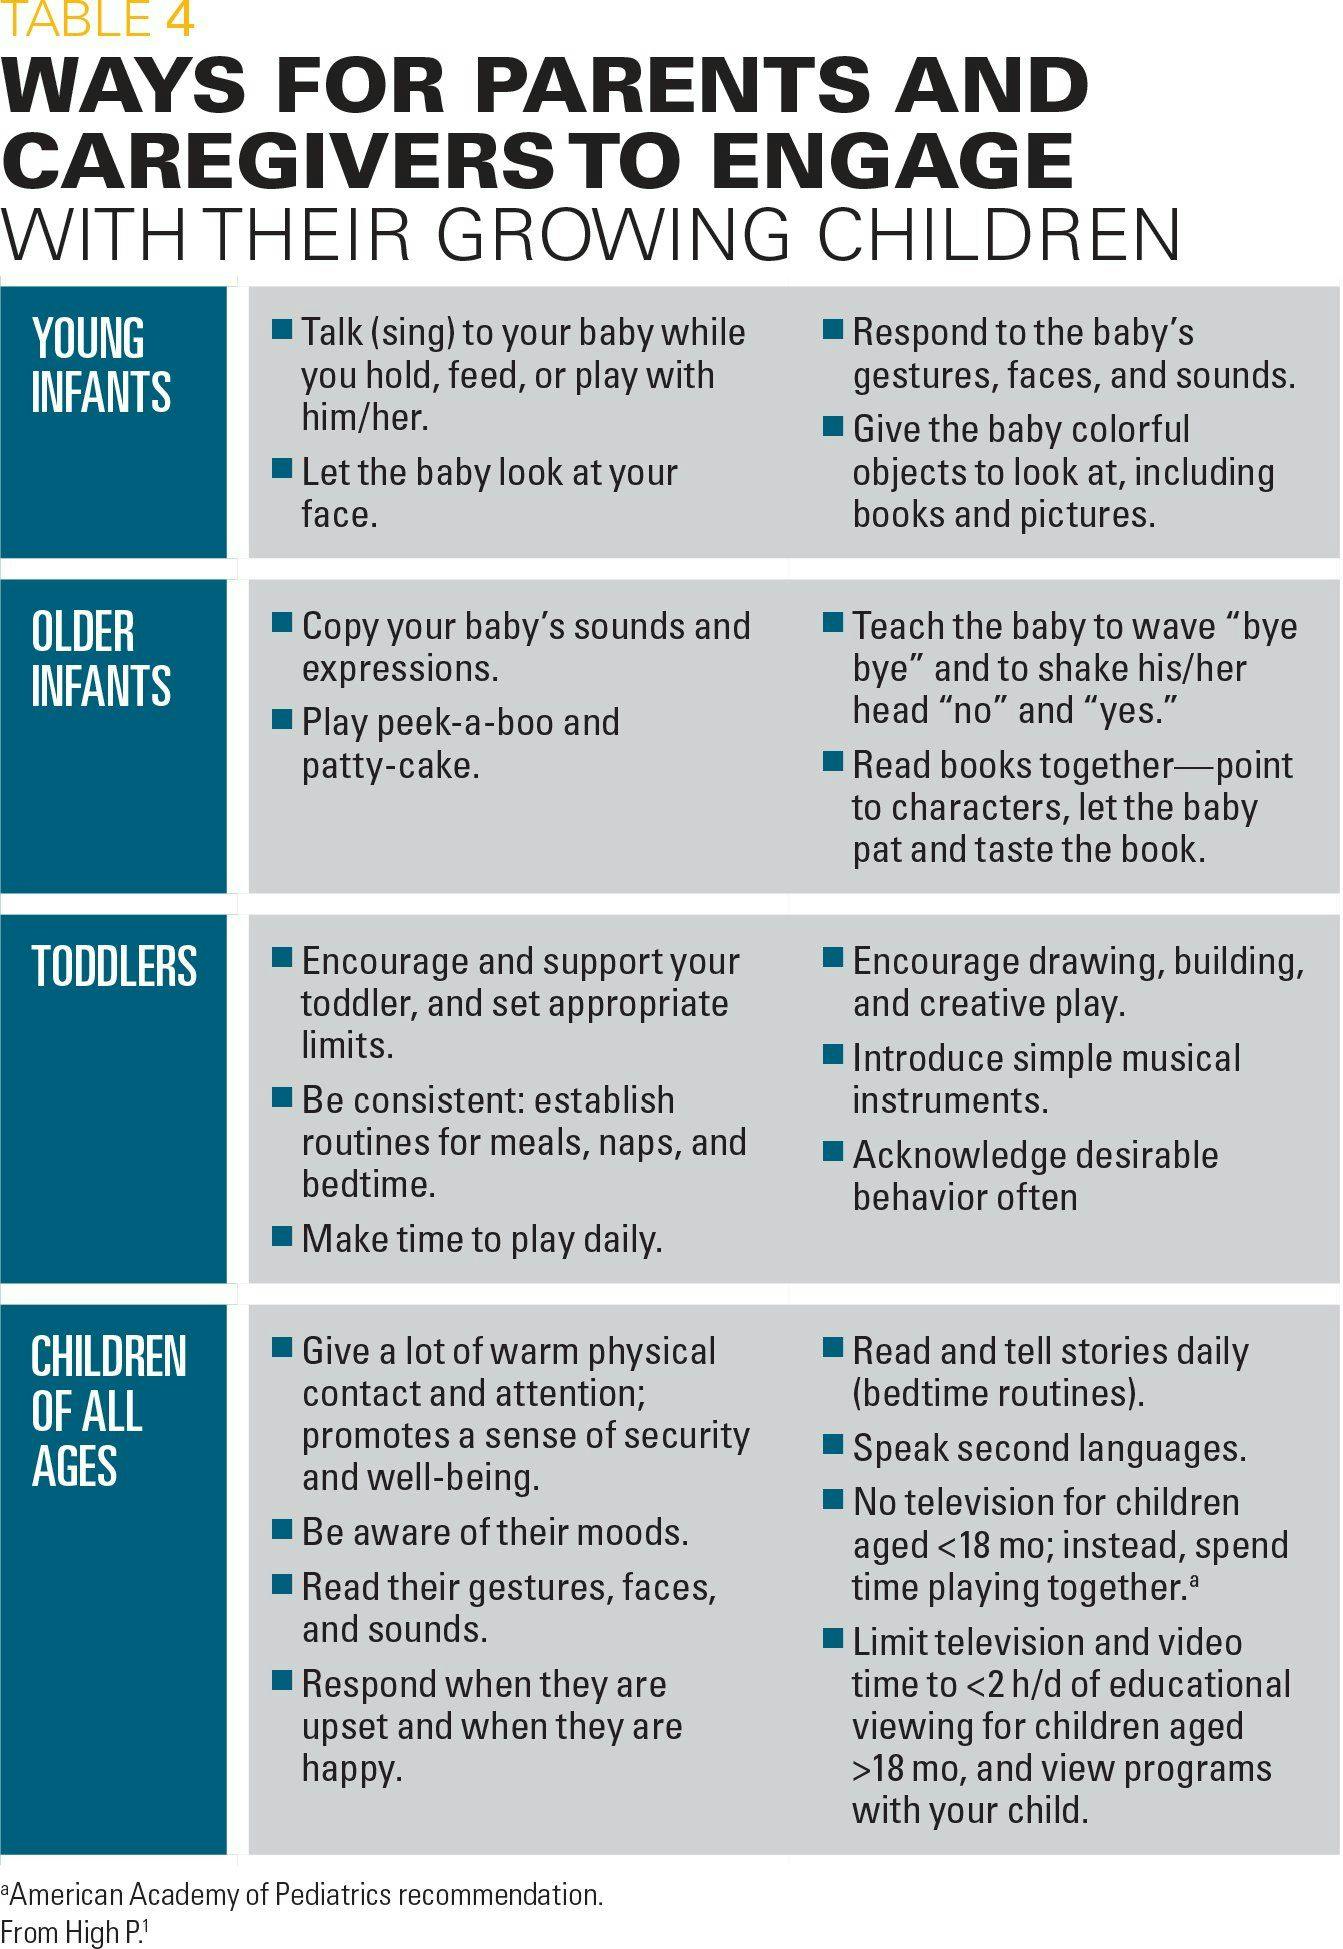 Ways for parents and caregivers to engage with their growing children